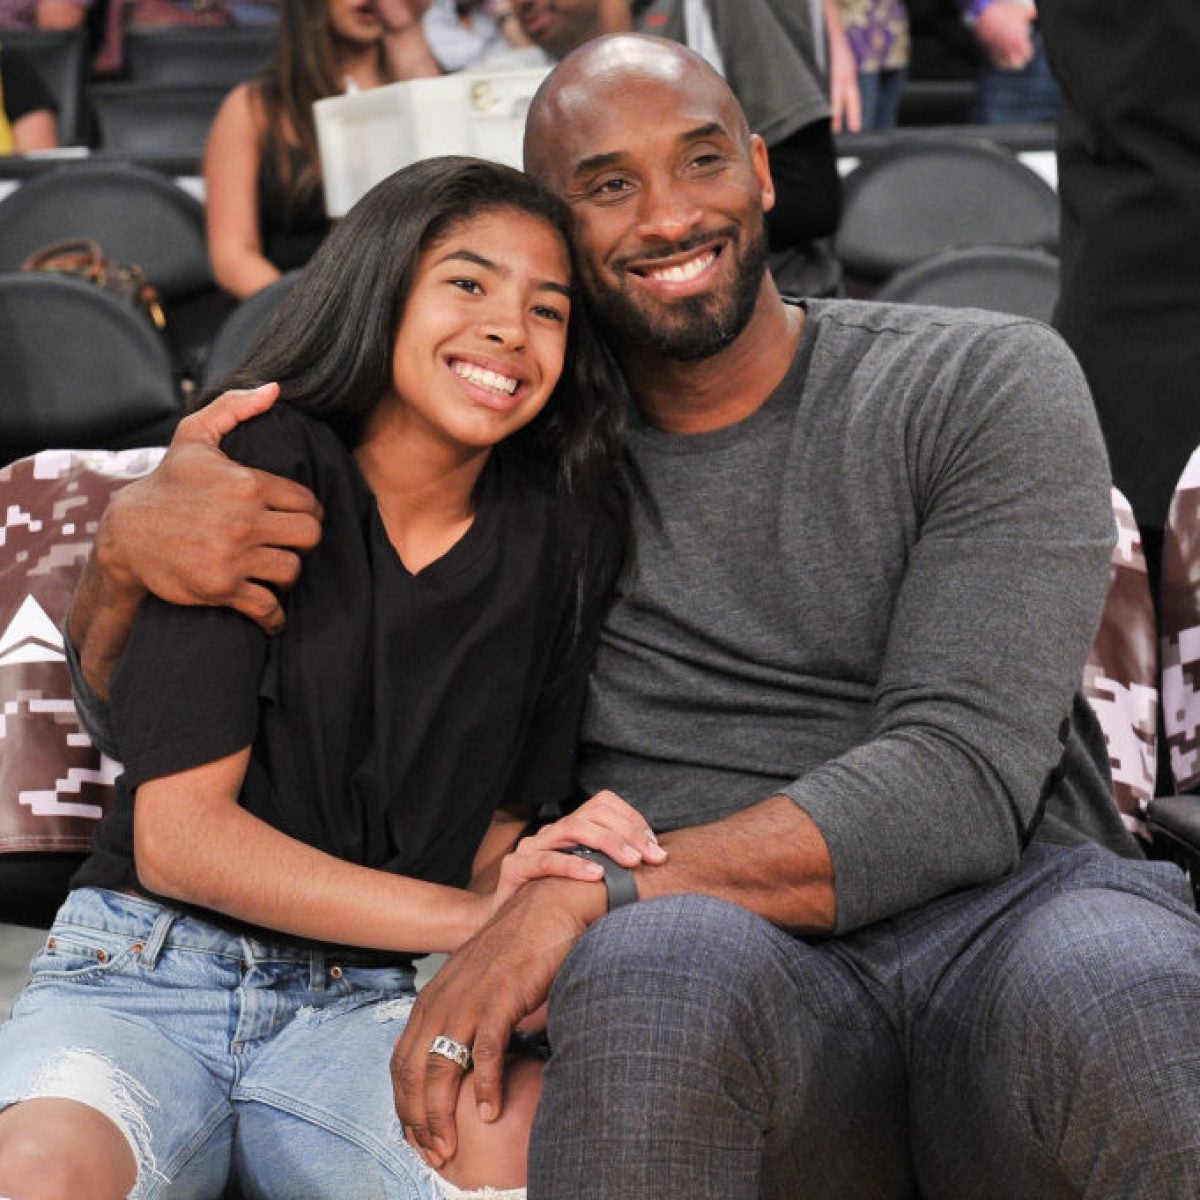 Kobe Bryant Crash: Brother Of Pilot Says He's Not At Fault